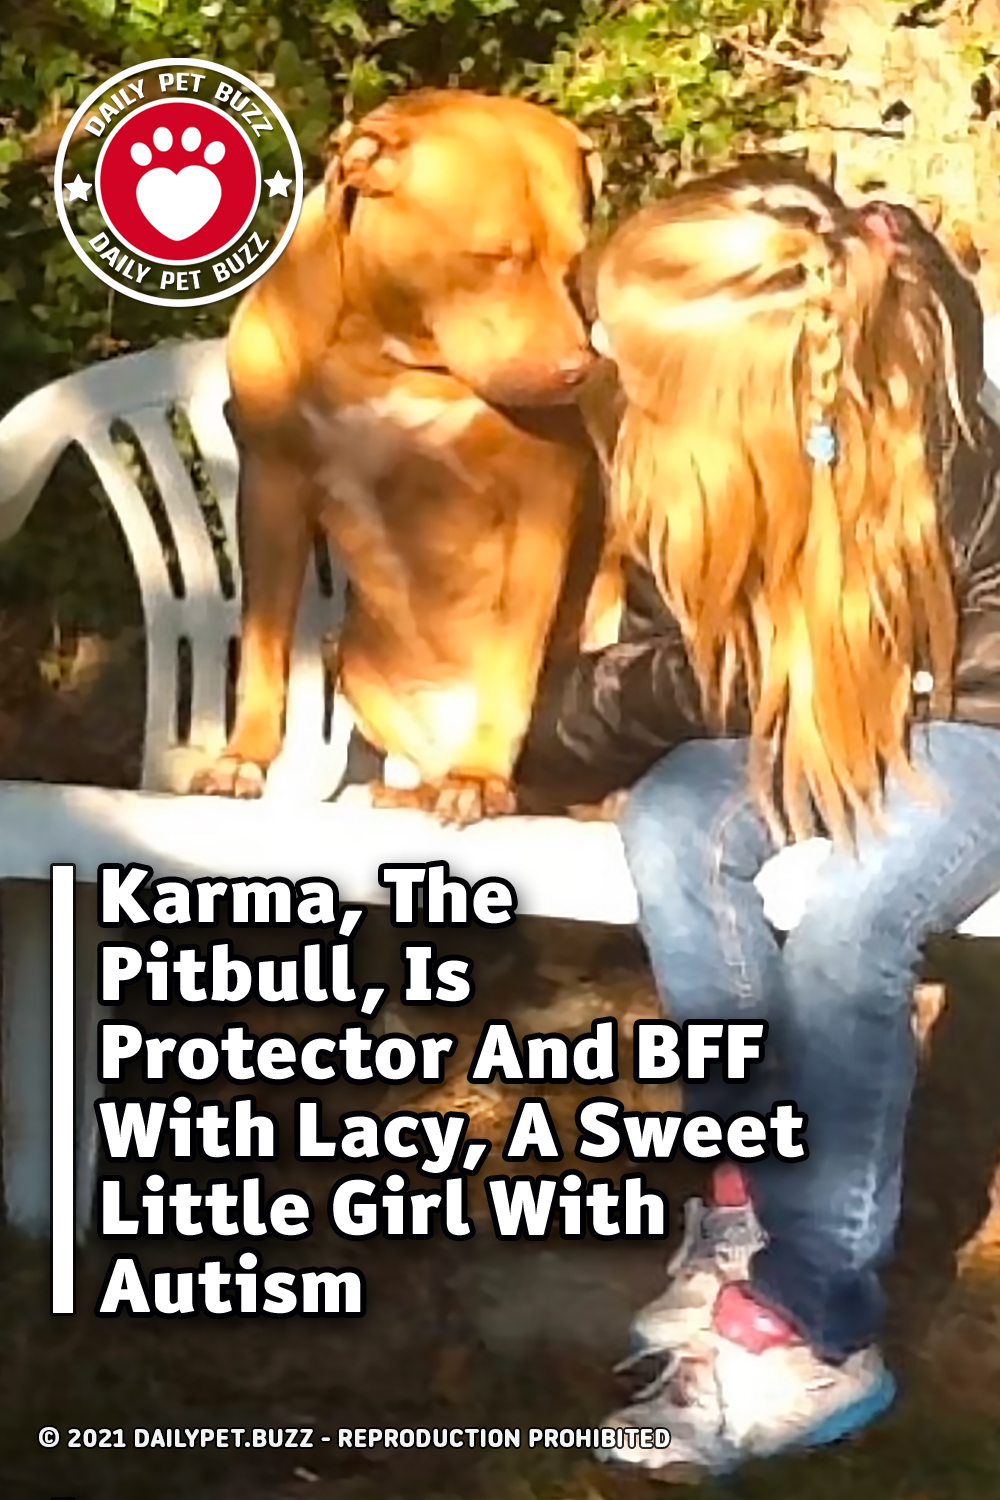 Karma, The Pitbull, Is Protector And BFF With Lacy, A Sweet Little Girl With Autism